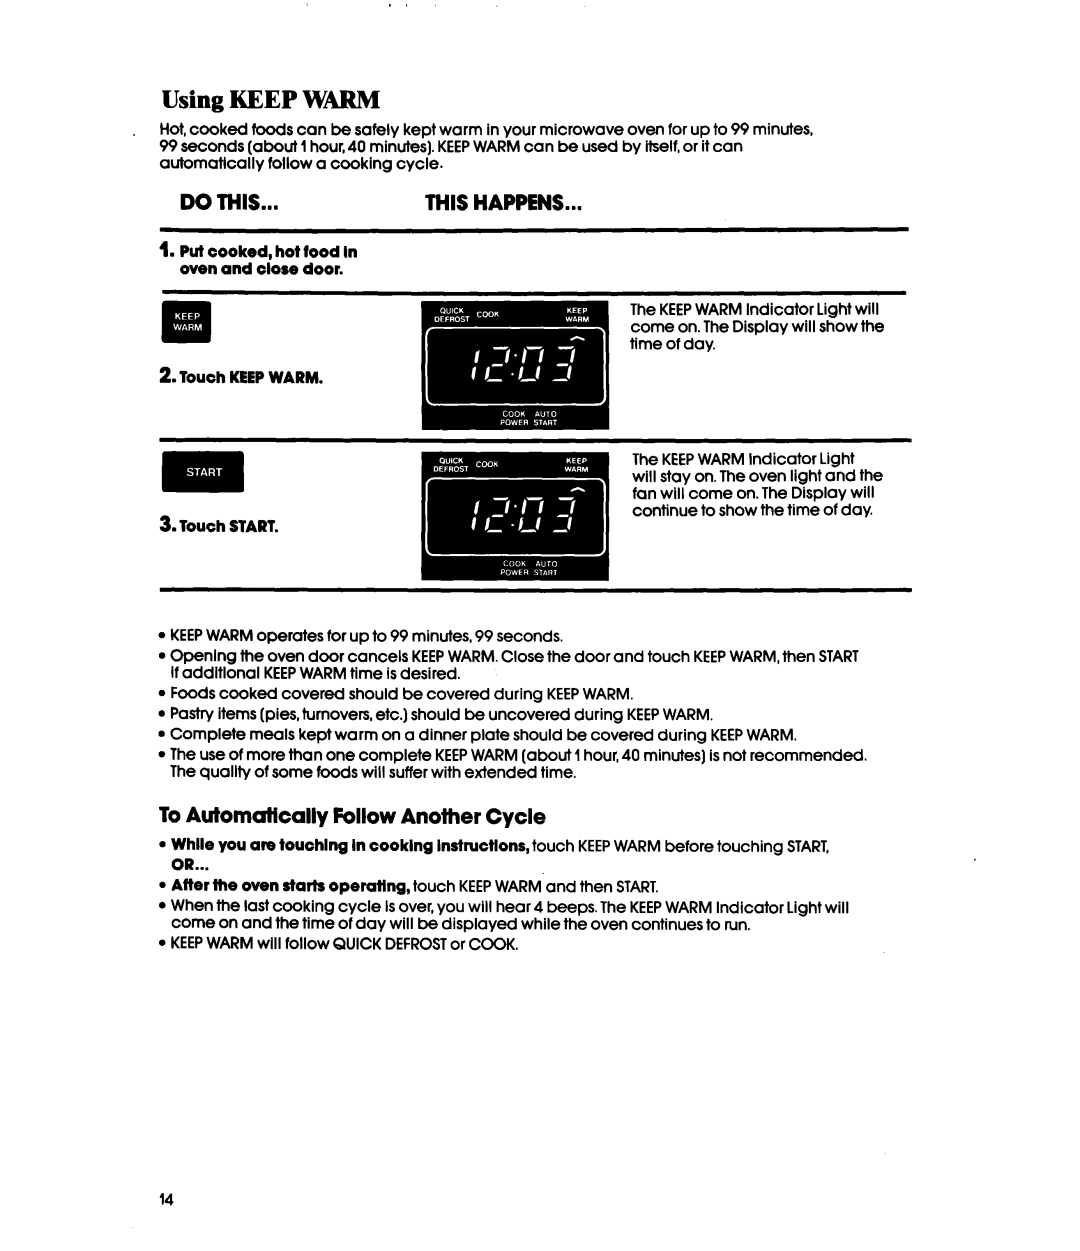 Whirlpool MH66OOXXO, MH6600XWl manual Using KEEP WARM, To Automatically Follow Another Cycle, Do This, This Happens 